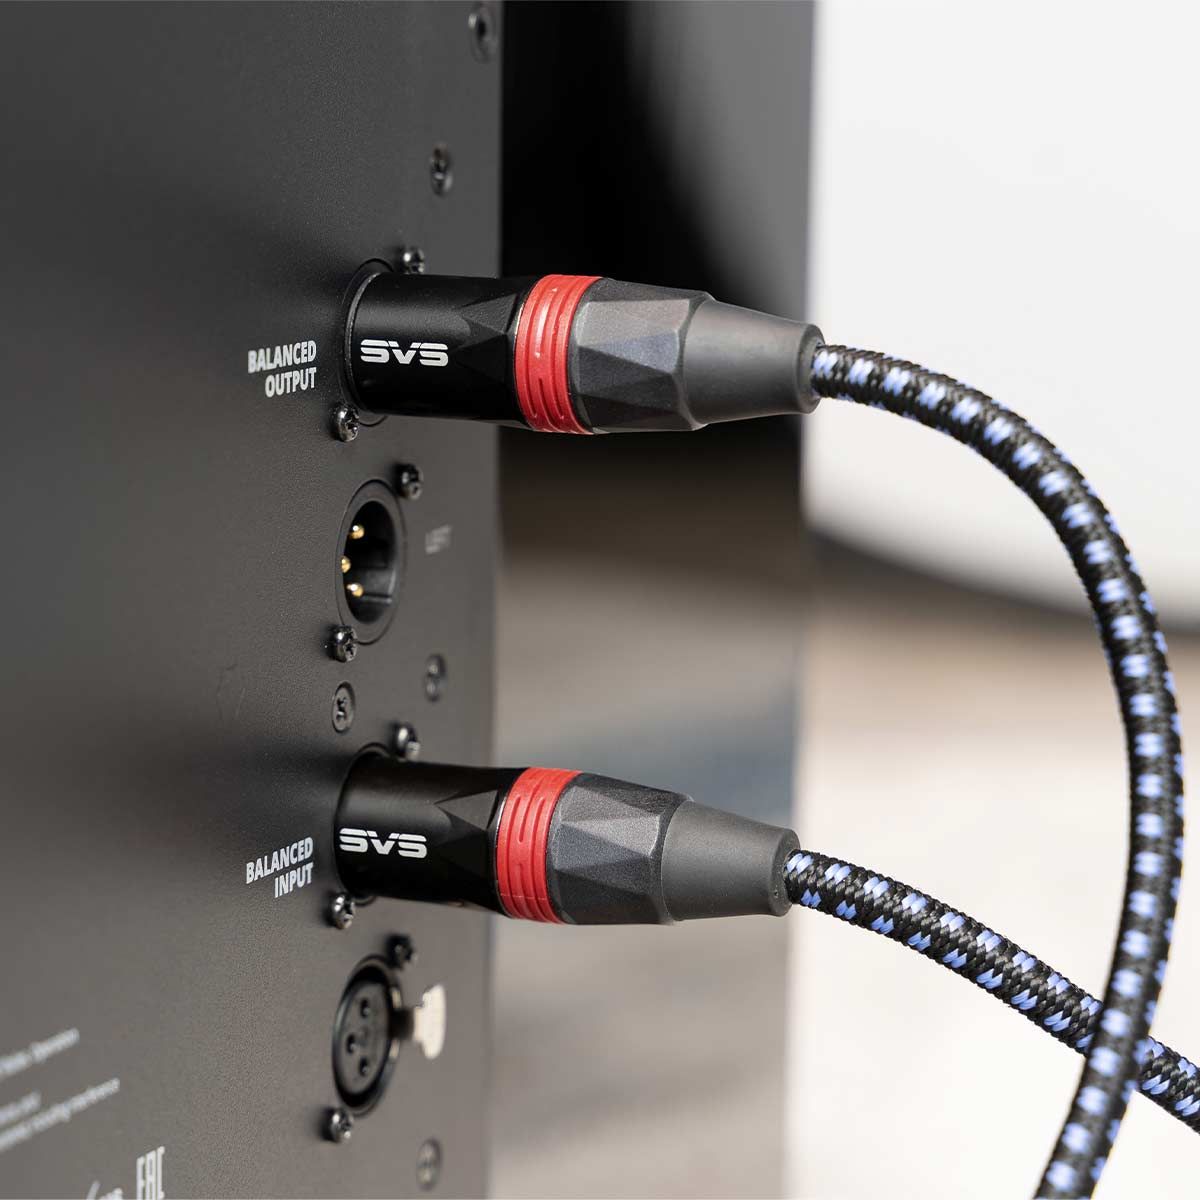 SVS SoundPath XLR Balanced XLR Audio Cable - connected to subwoofer